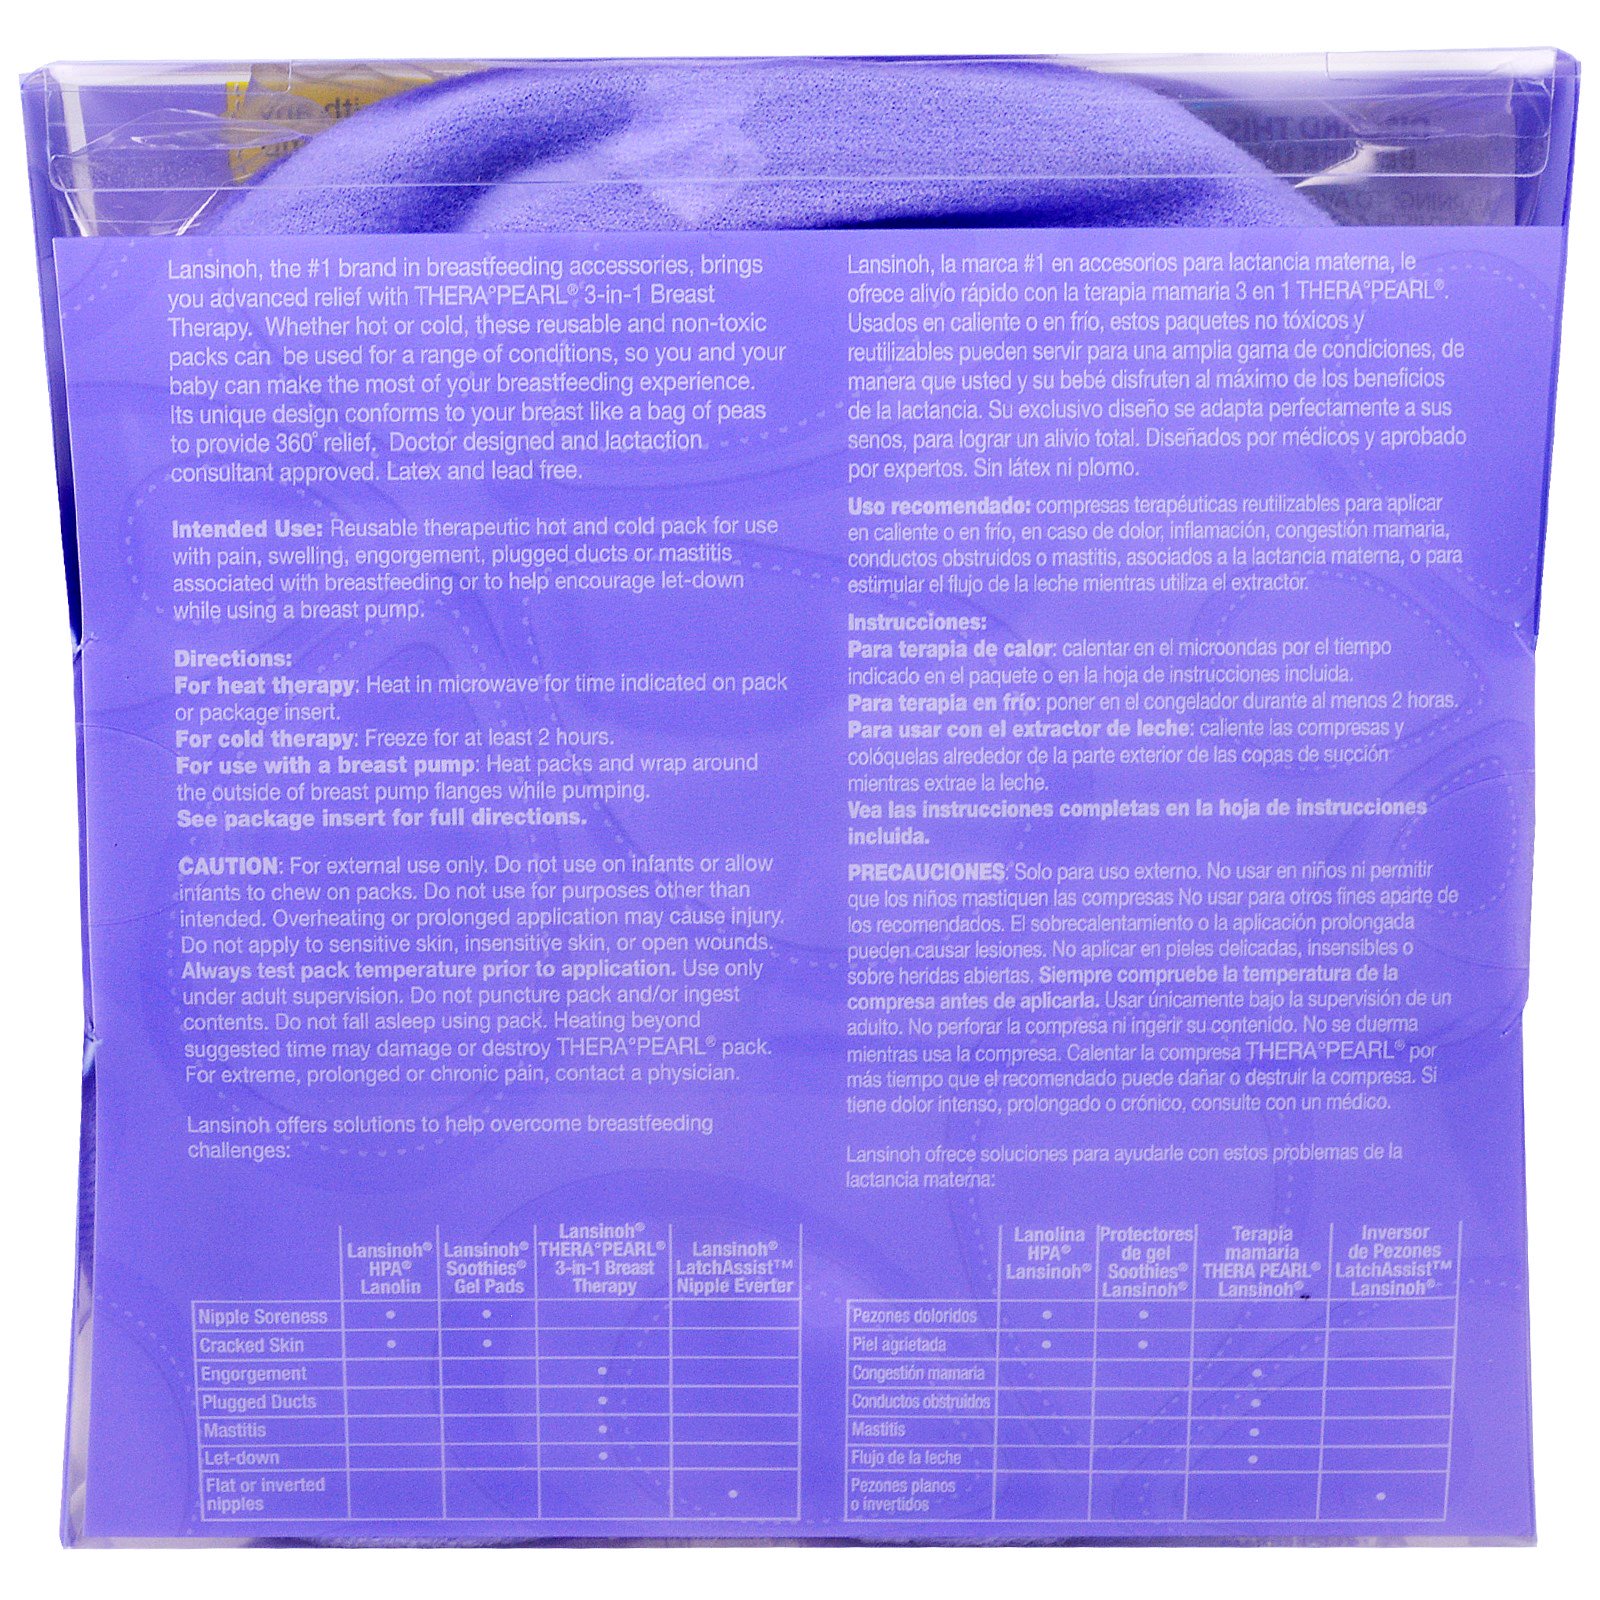 Lansinoh TheraPearl® 3-in-1 Breast Therapy Packs